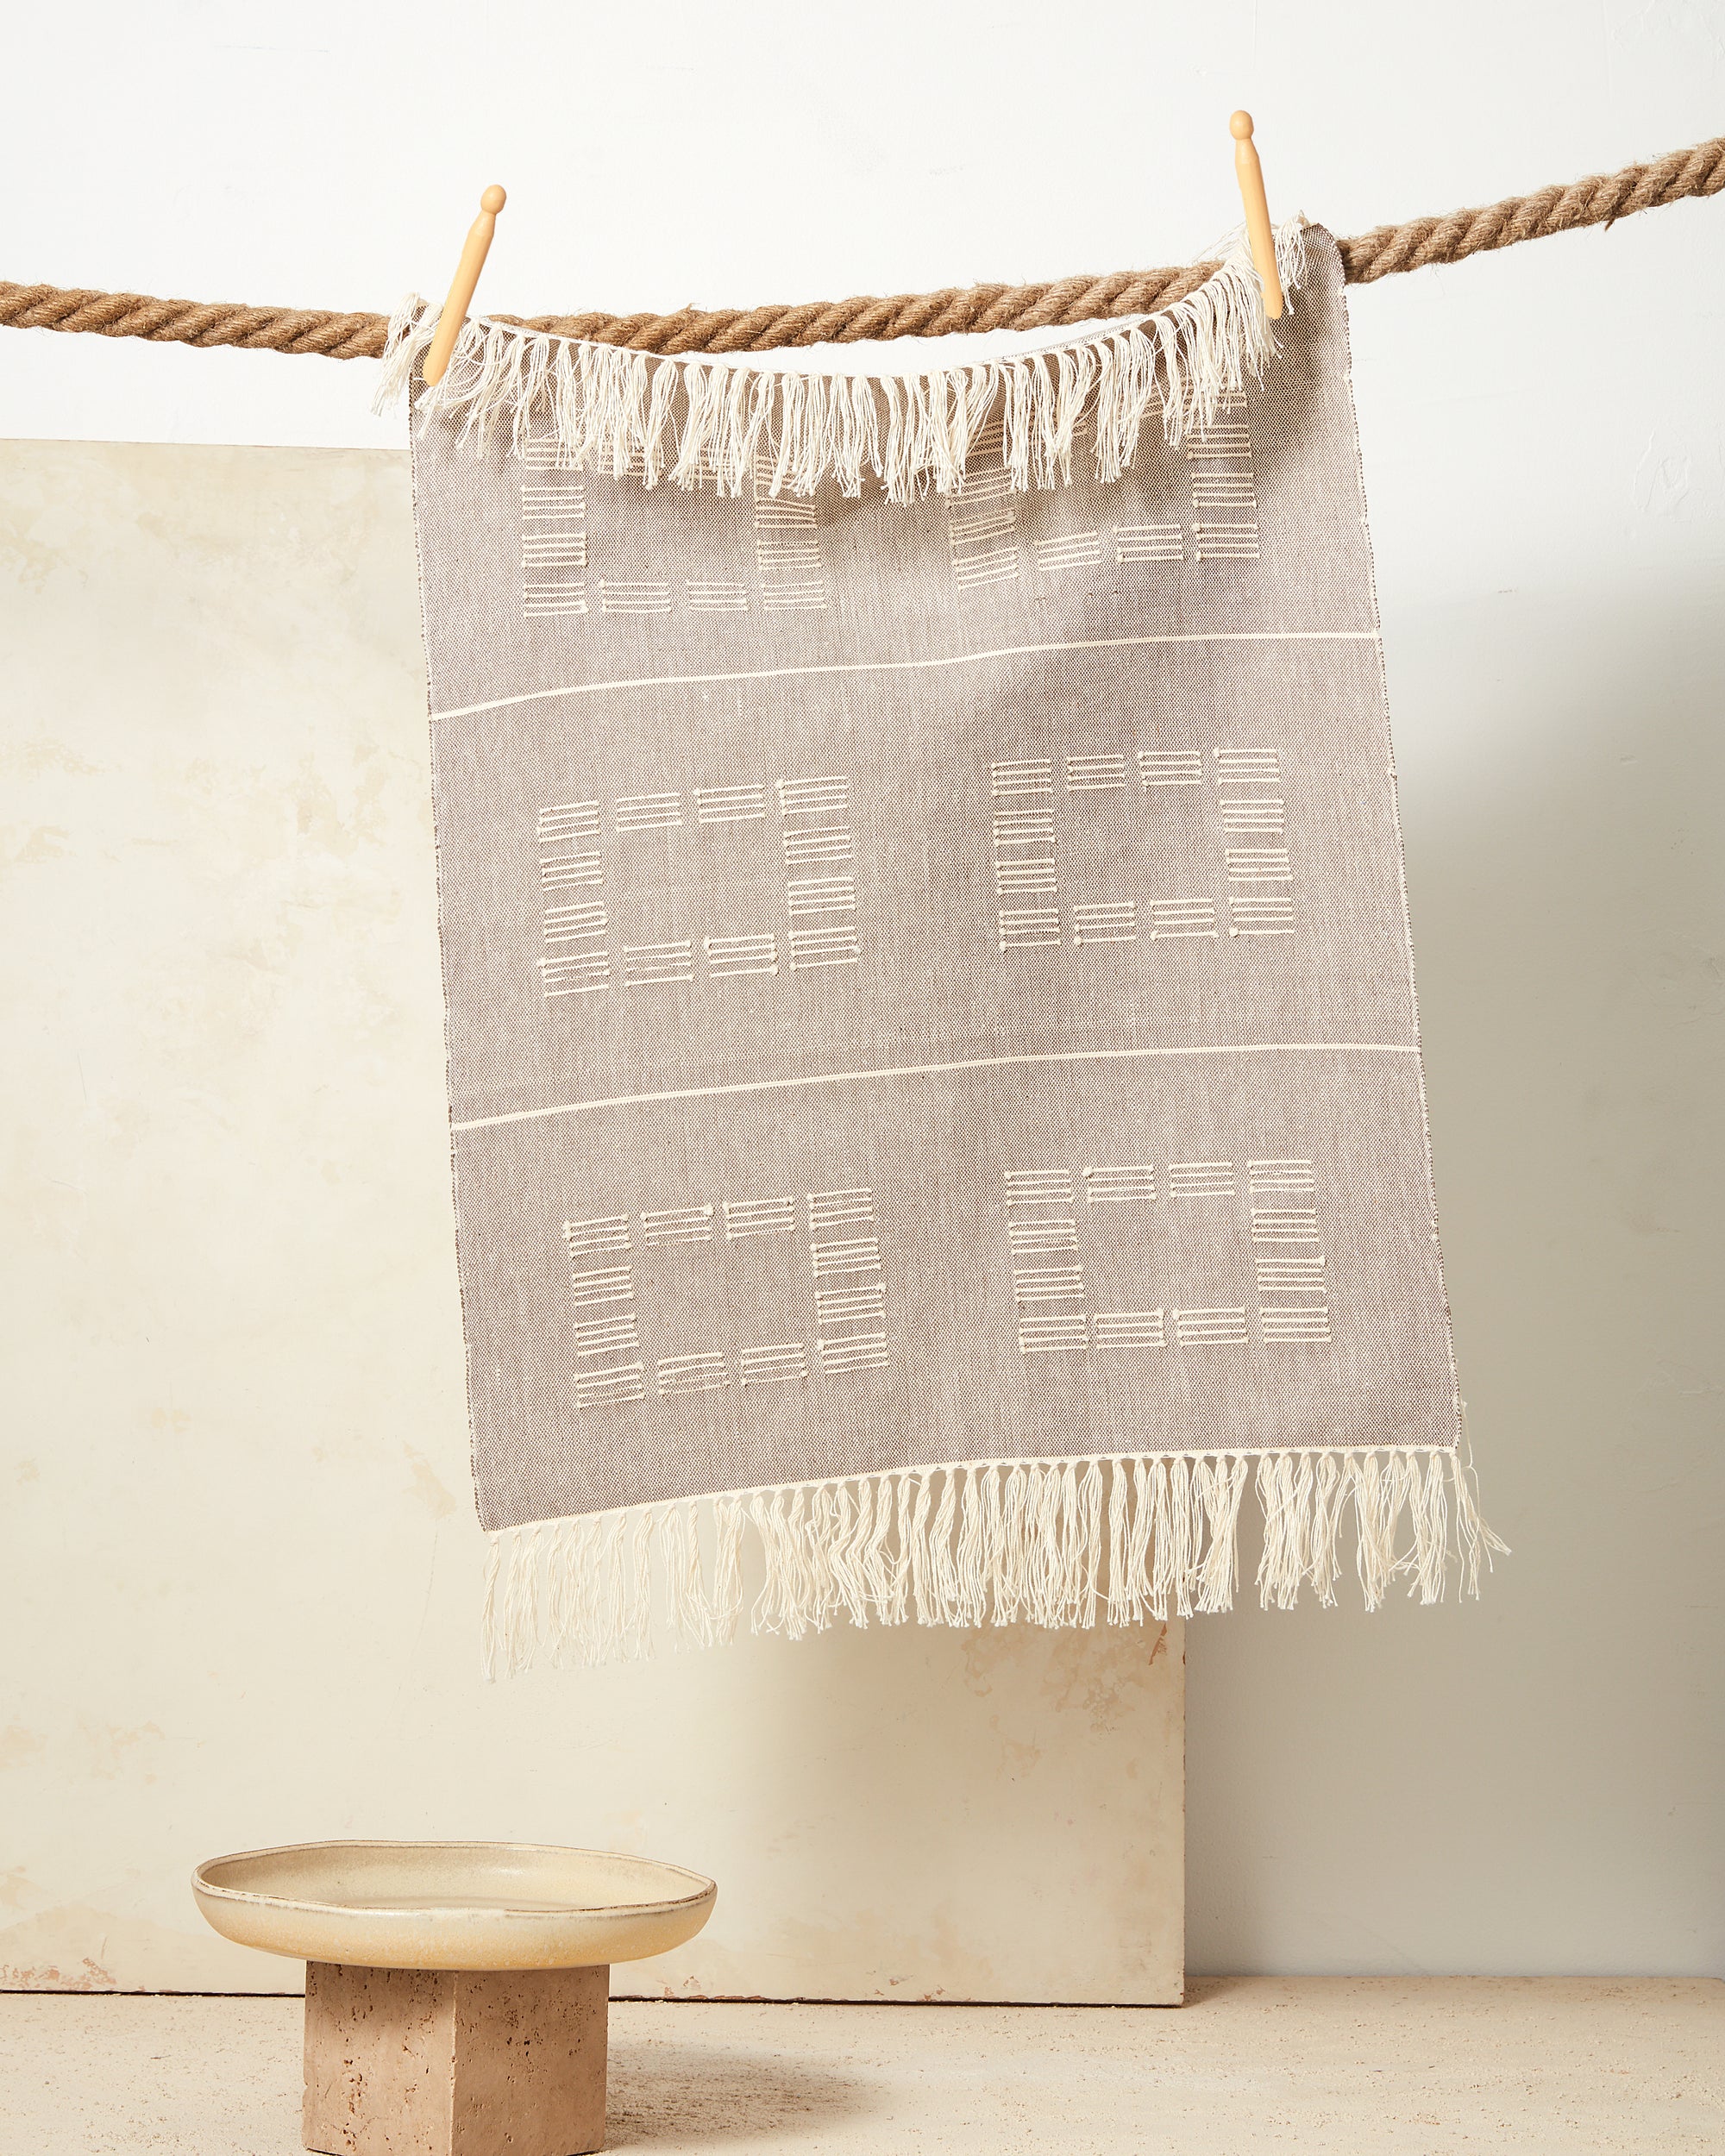 Shapes Tea Towel in Blue - Handwoven Kitchen Towels